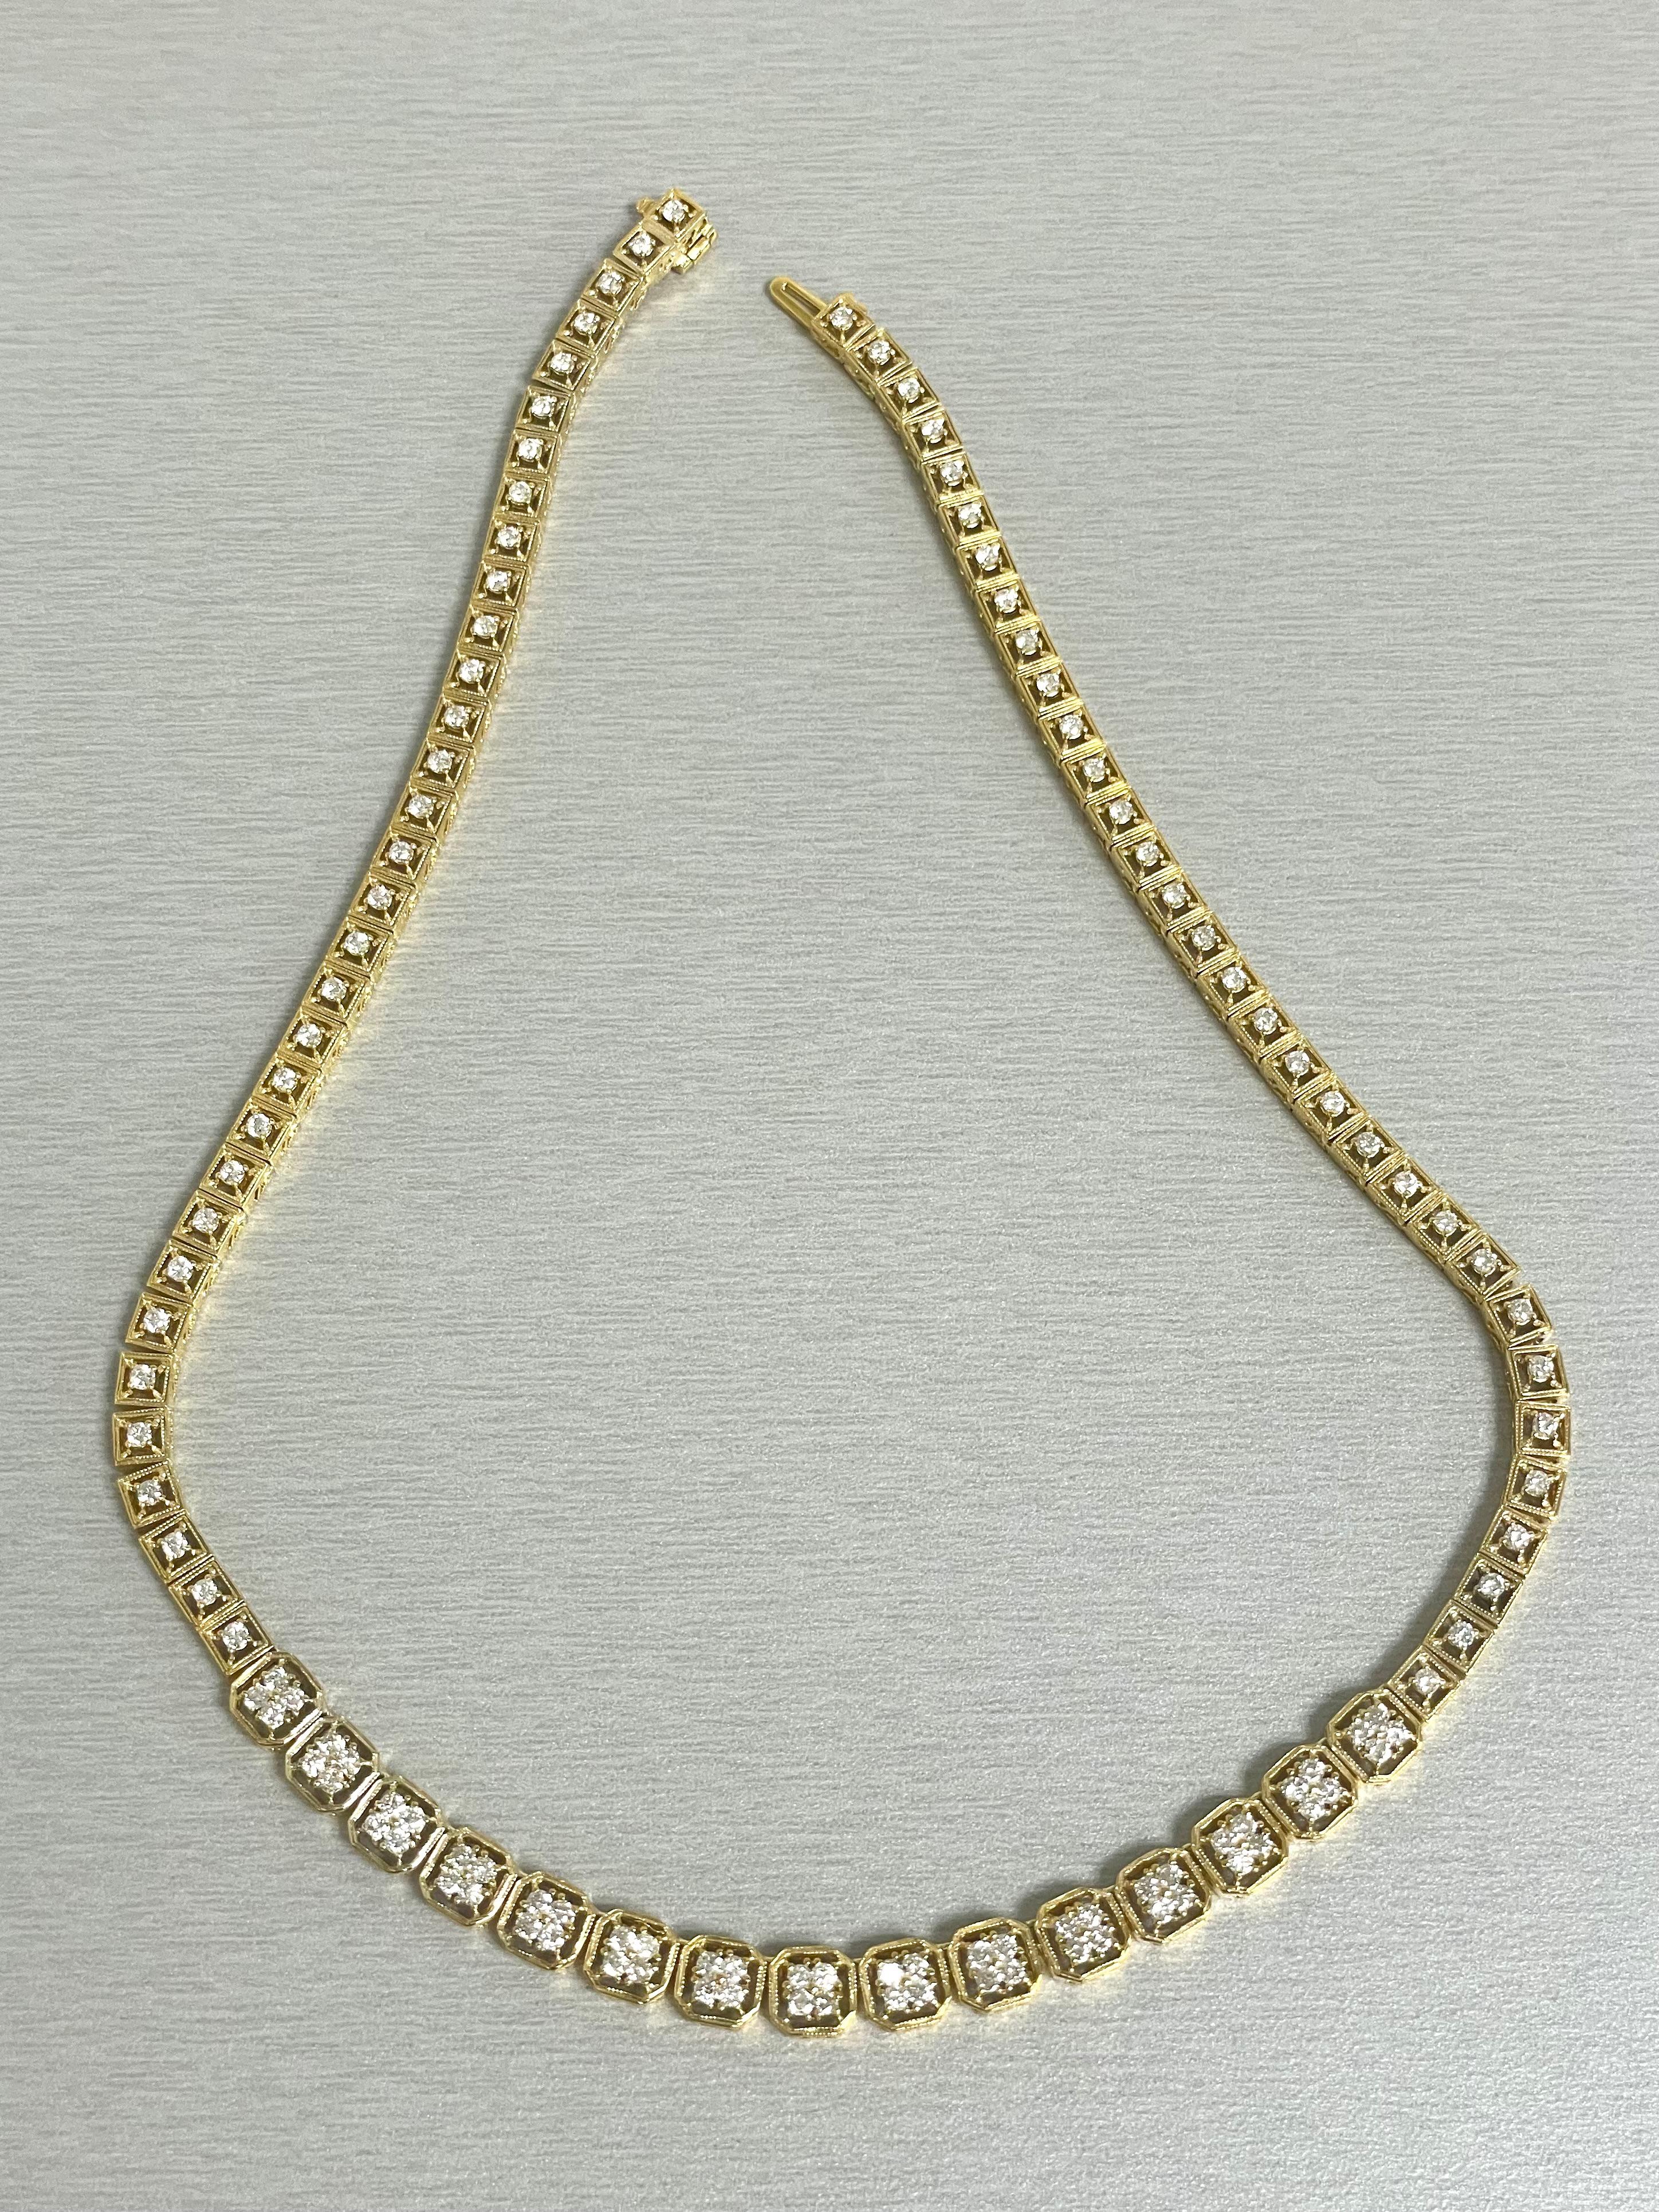 Round Cut Beauvince Madeline Diamond Necklace, '4.30 Ct Diamonds', in Yellow Gold For Sale